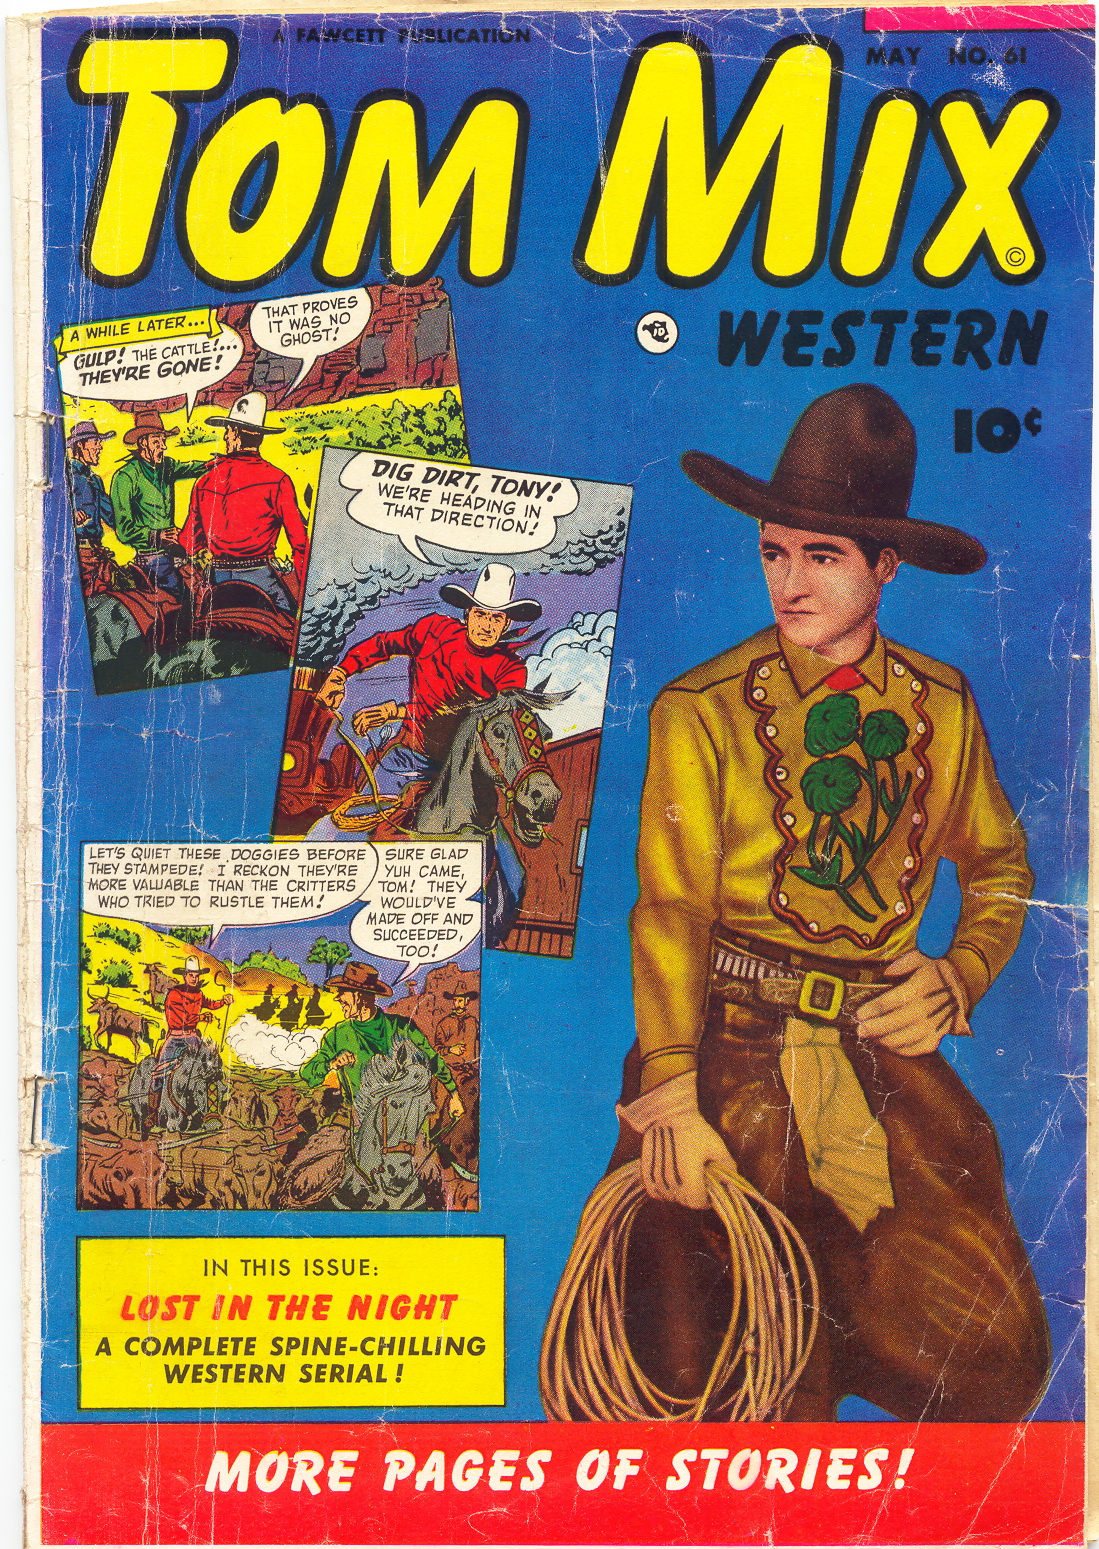 Tom Mix Western (1948) 61 Page 1